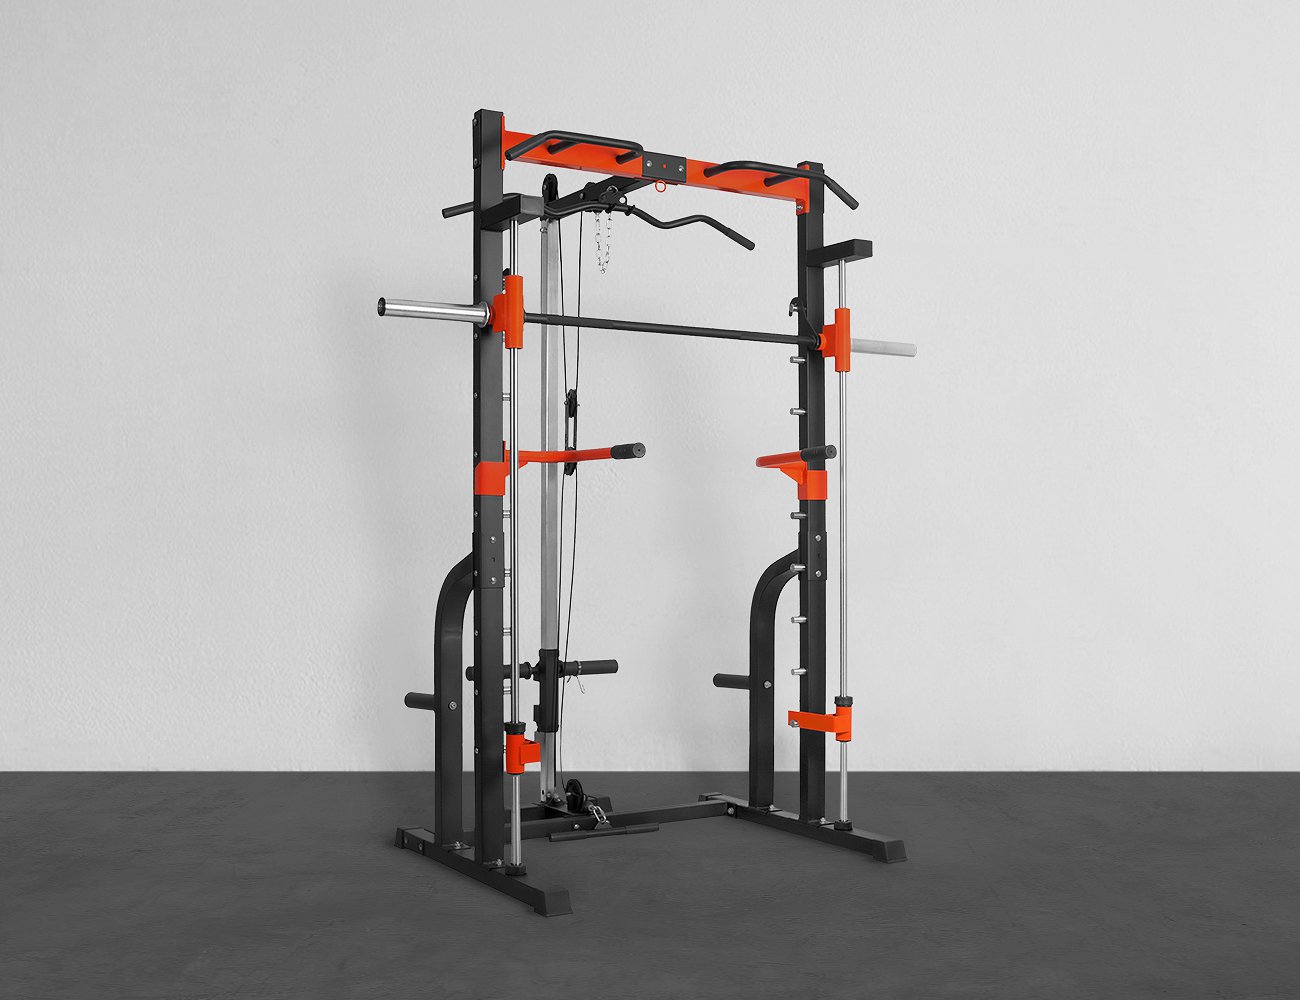 Smith Machine Home Gym multifunctional Trainer